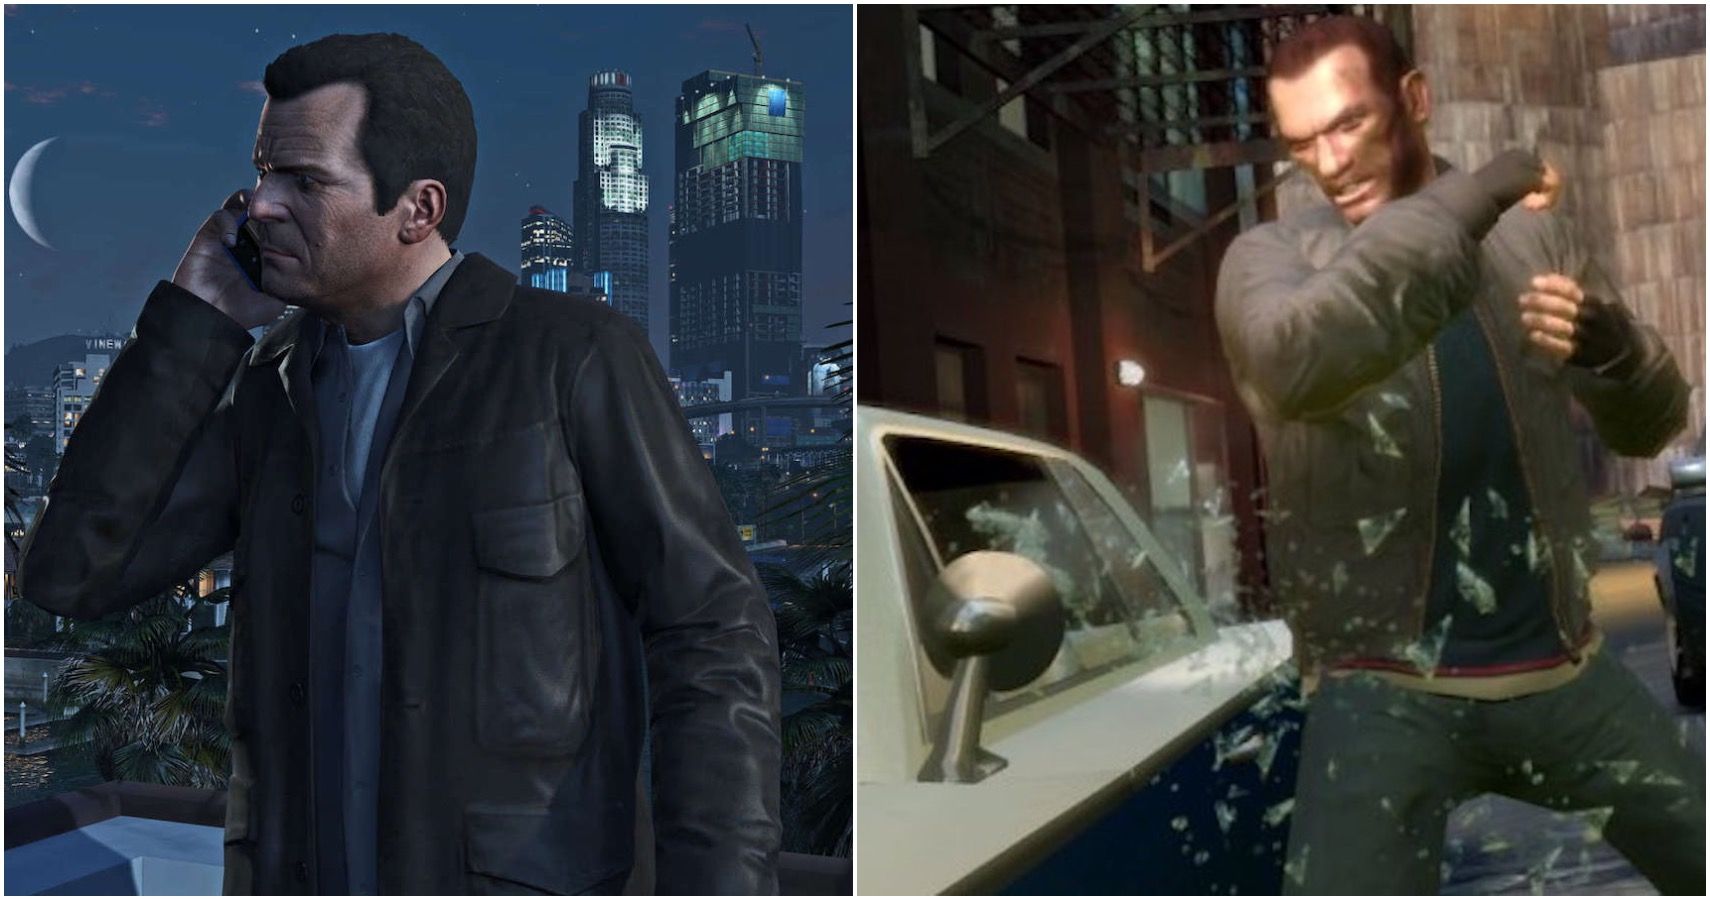 GTA III vs GTA Vice City: Which game has more replay value in 2021?